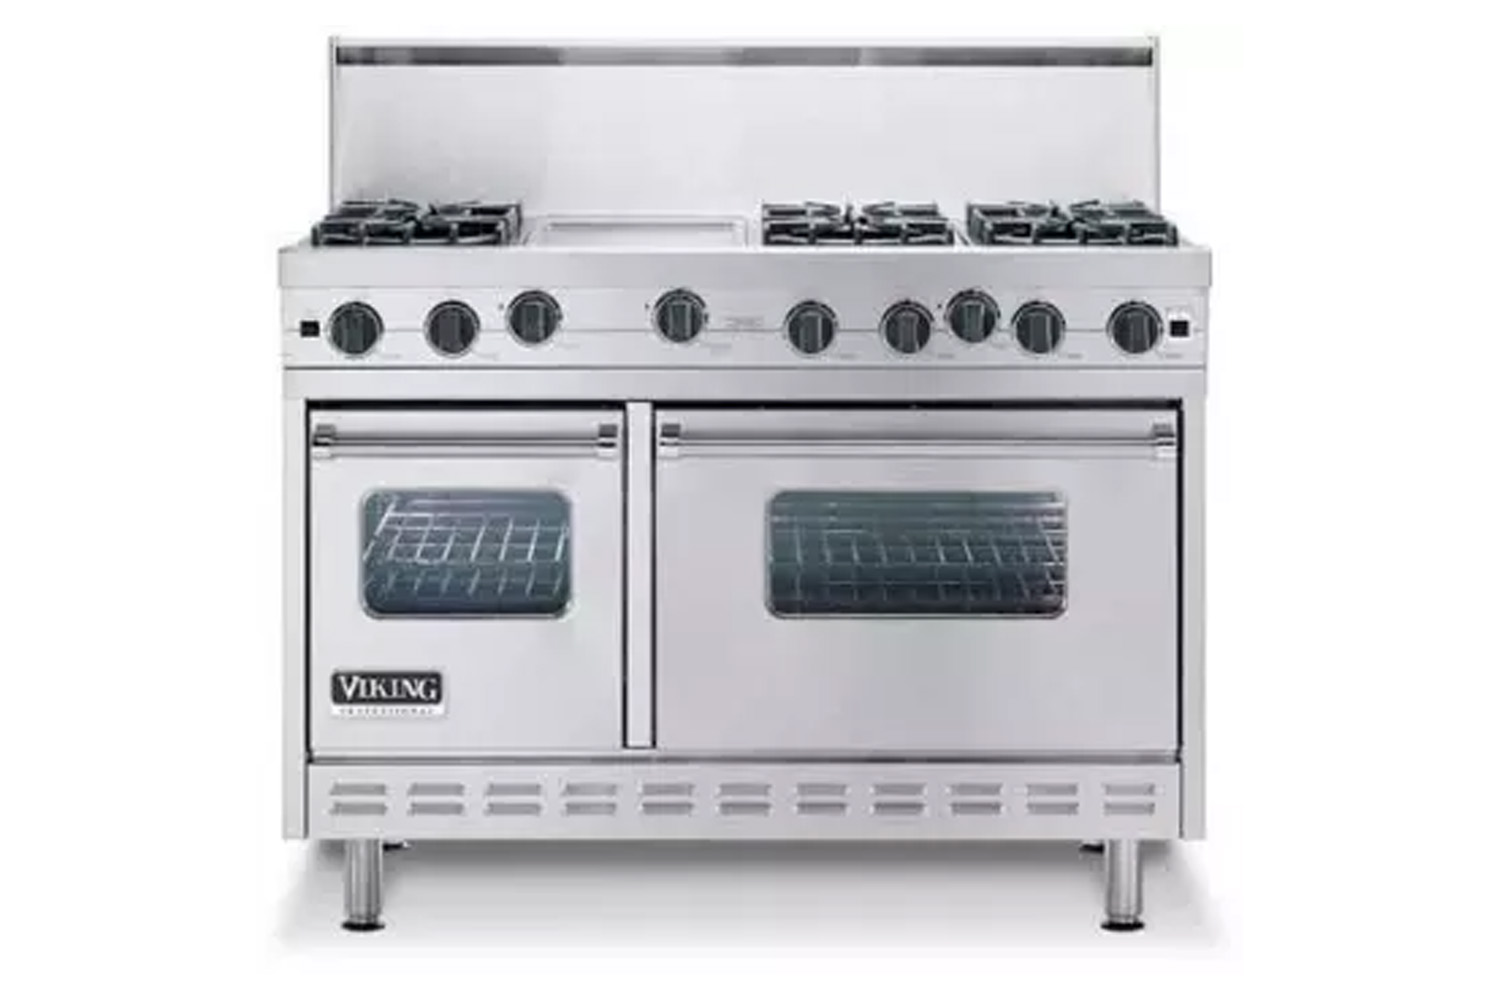 the viking professional series 48 inch pro style gas range (vgic4856gss) is now 12